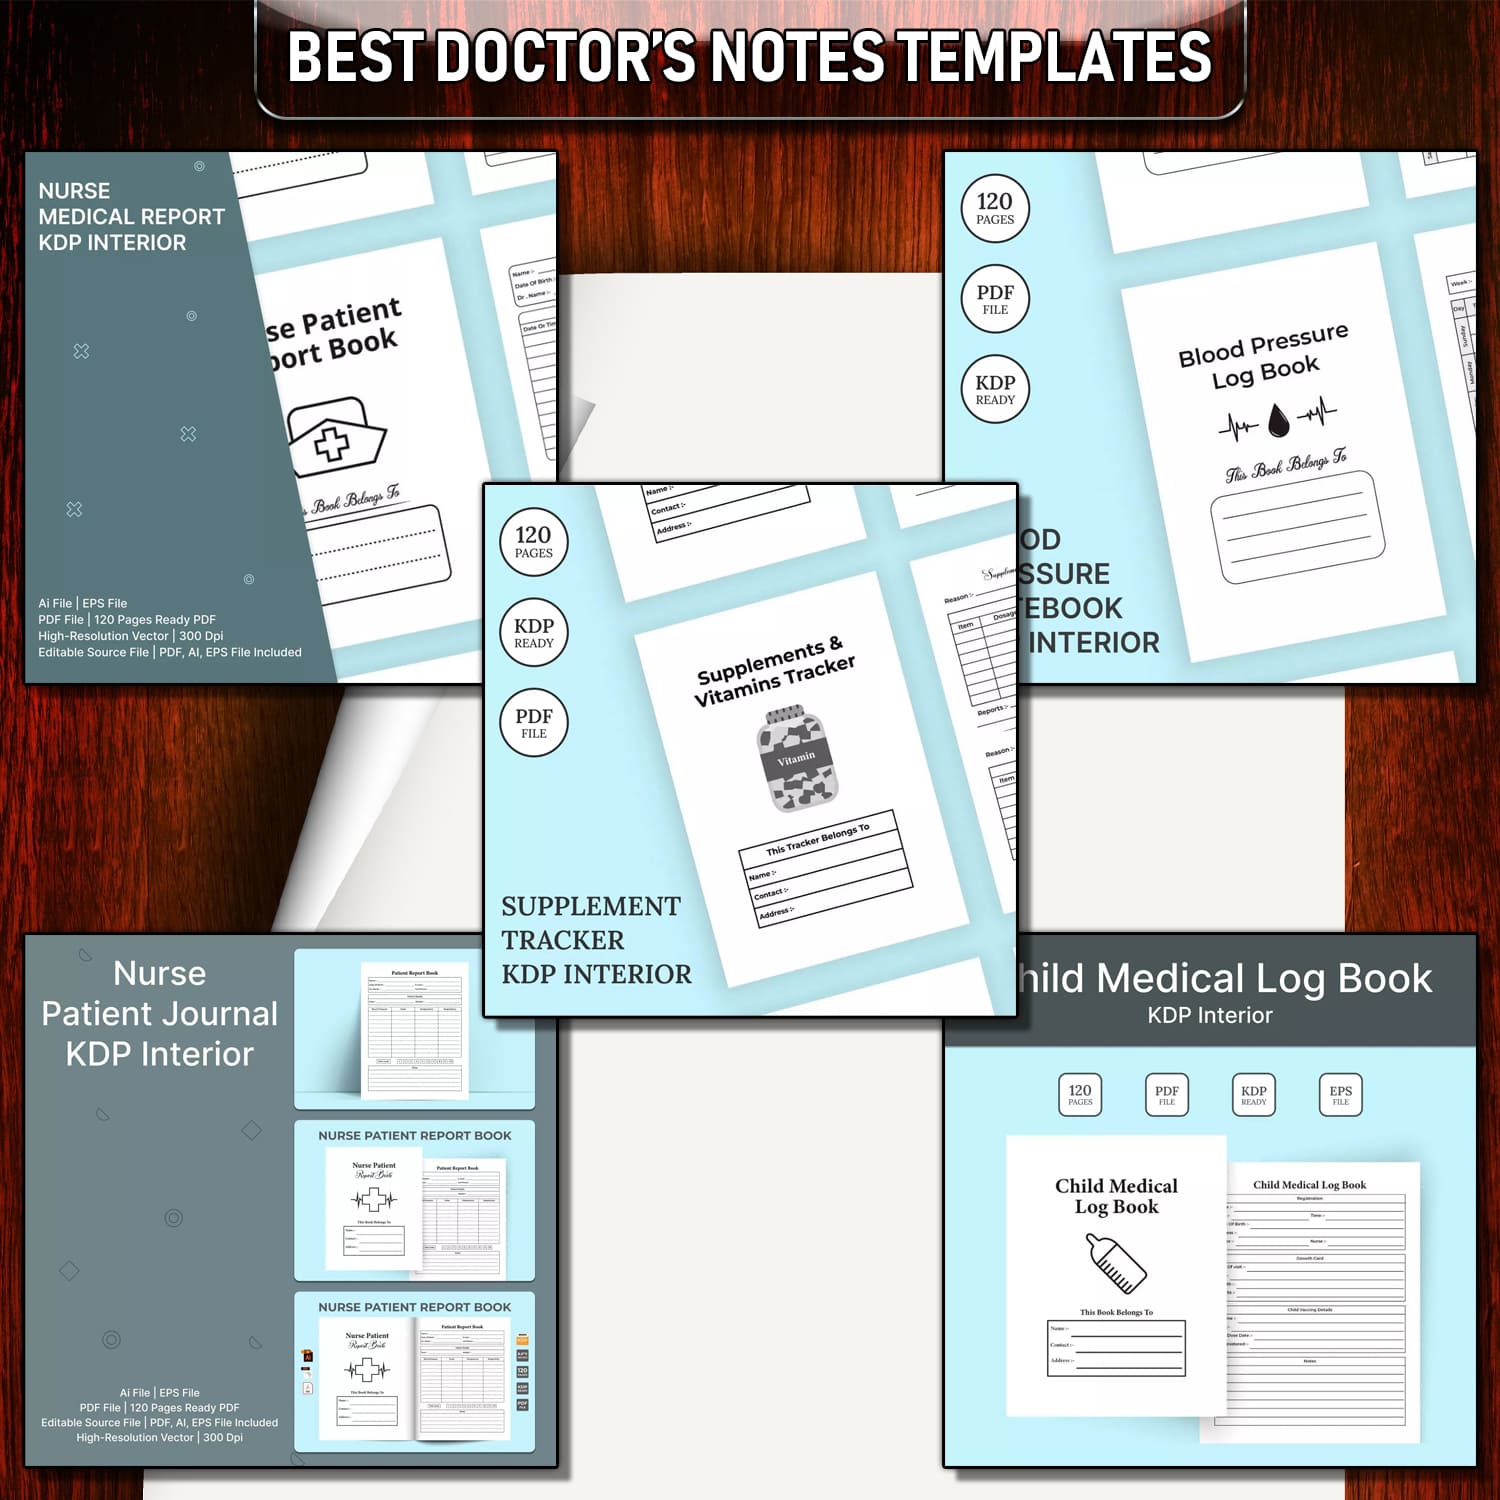 Best Doctors Notes Templates cover image.